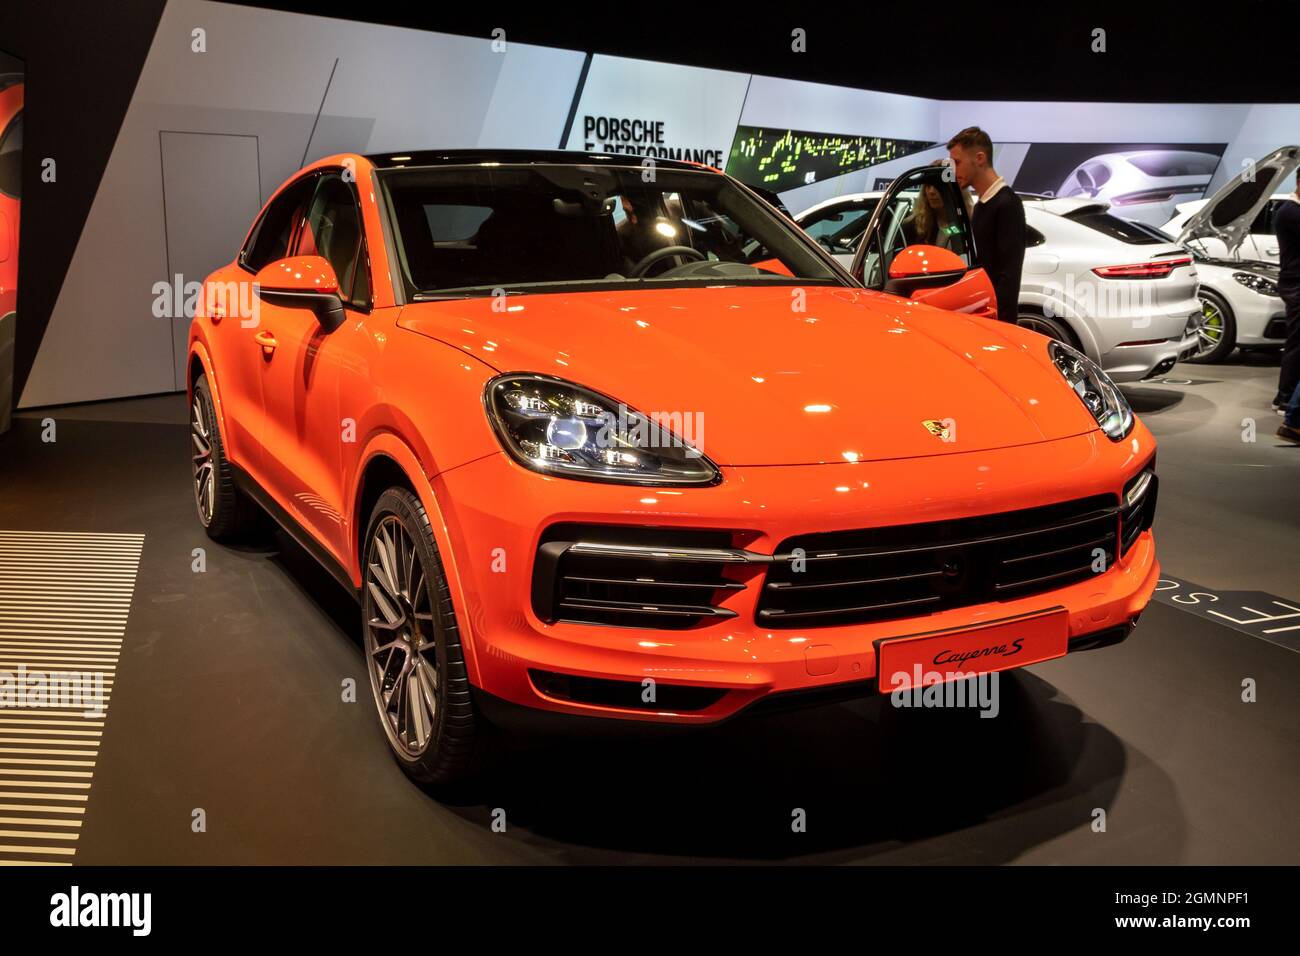 Porsche Cayenne S Coupe car showcased at the Frankfurt IAA Motor Show. Germany - September 10, 2019 Stock Photo